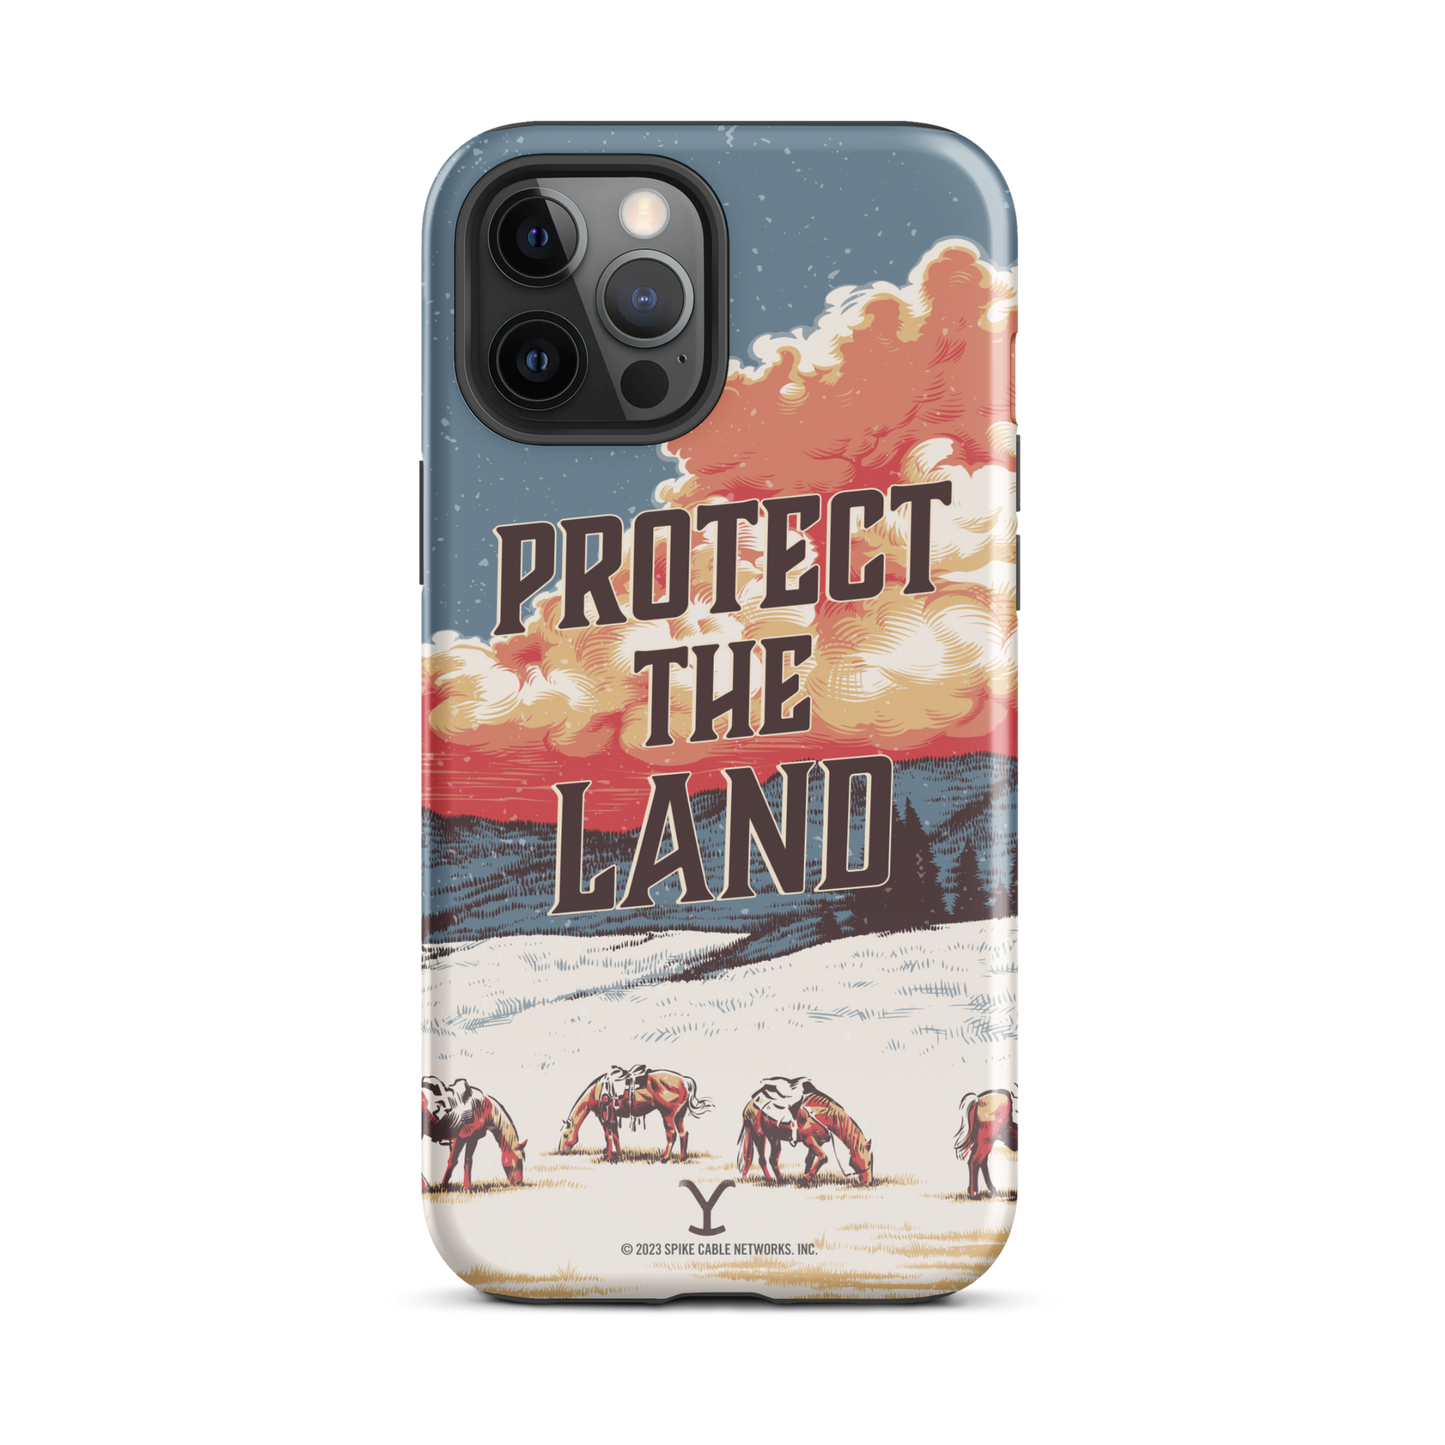 Yellowstone Protect the Land Tough Phone Case - iPhone